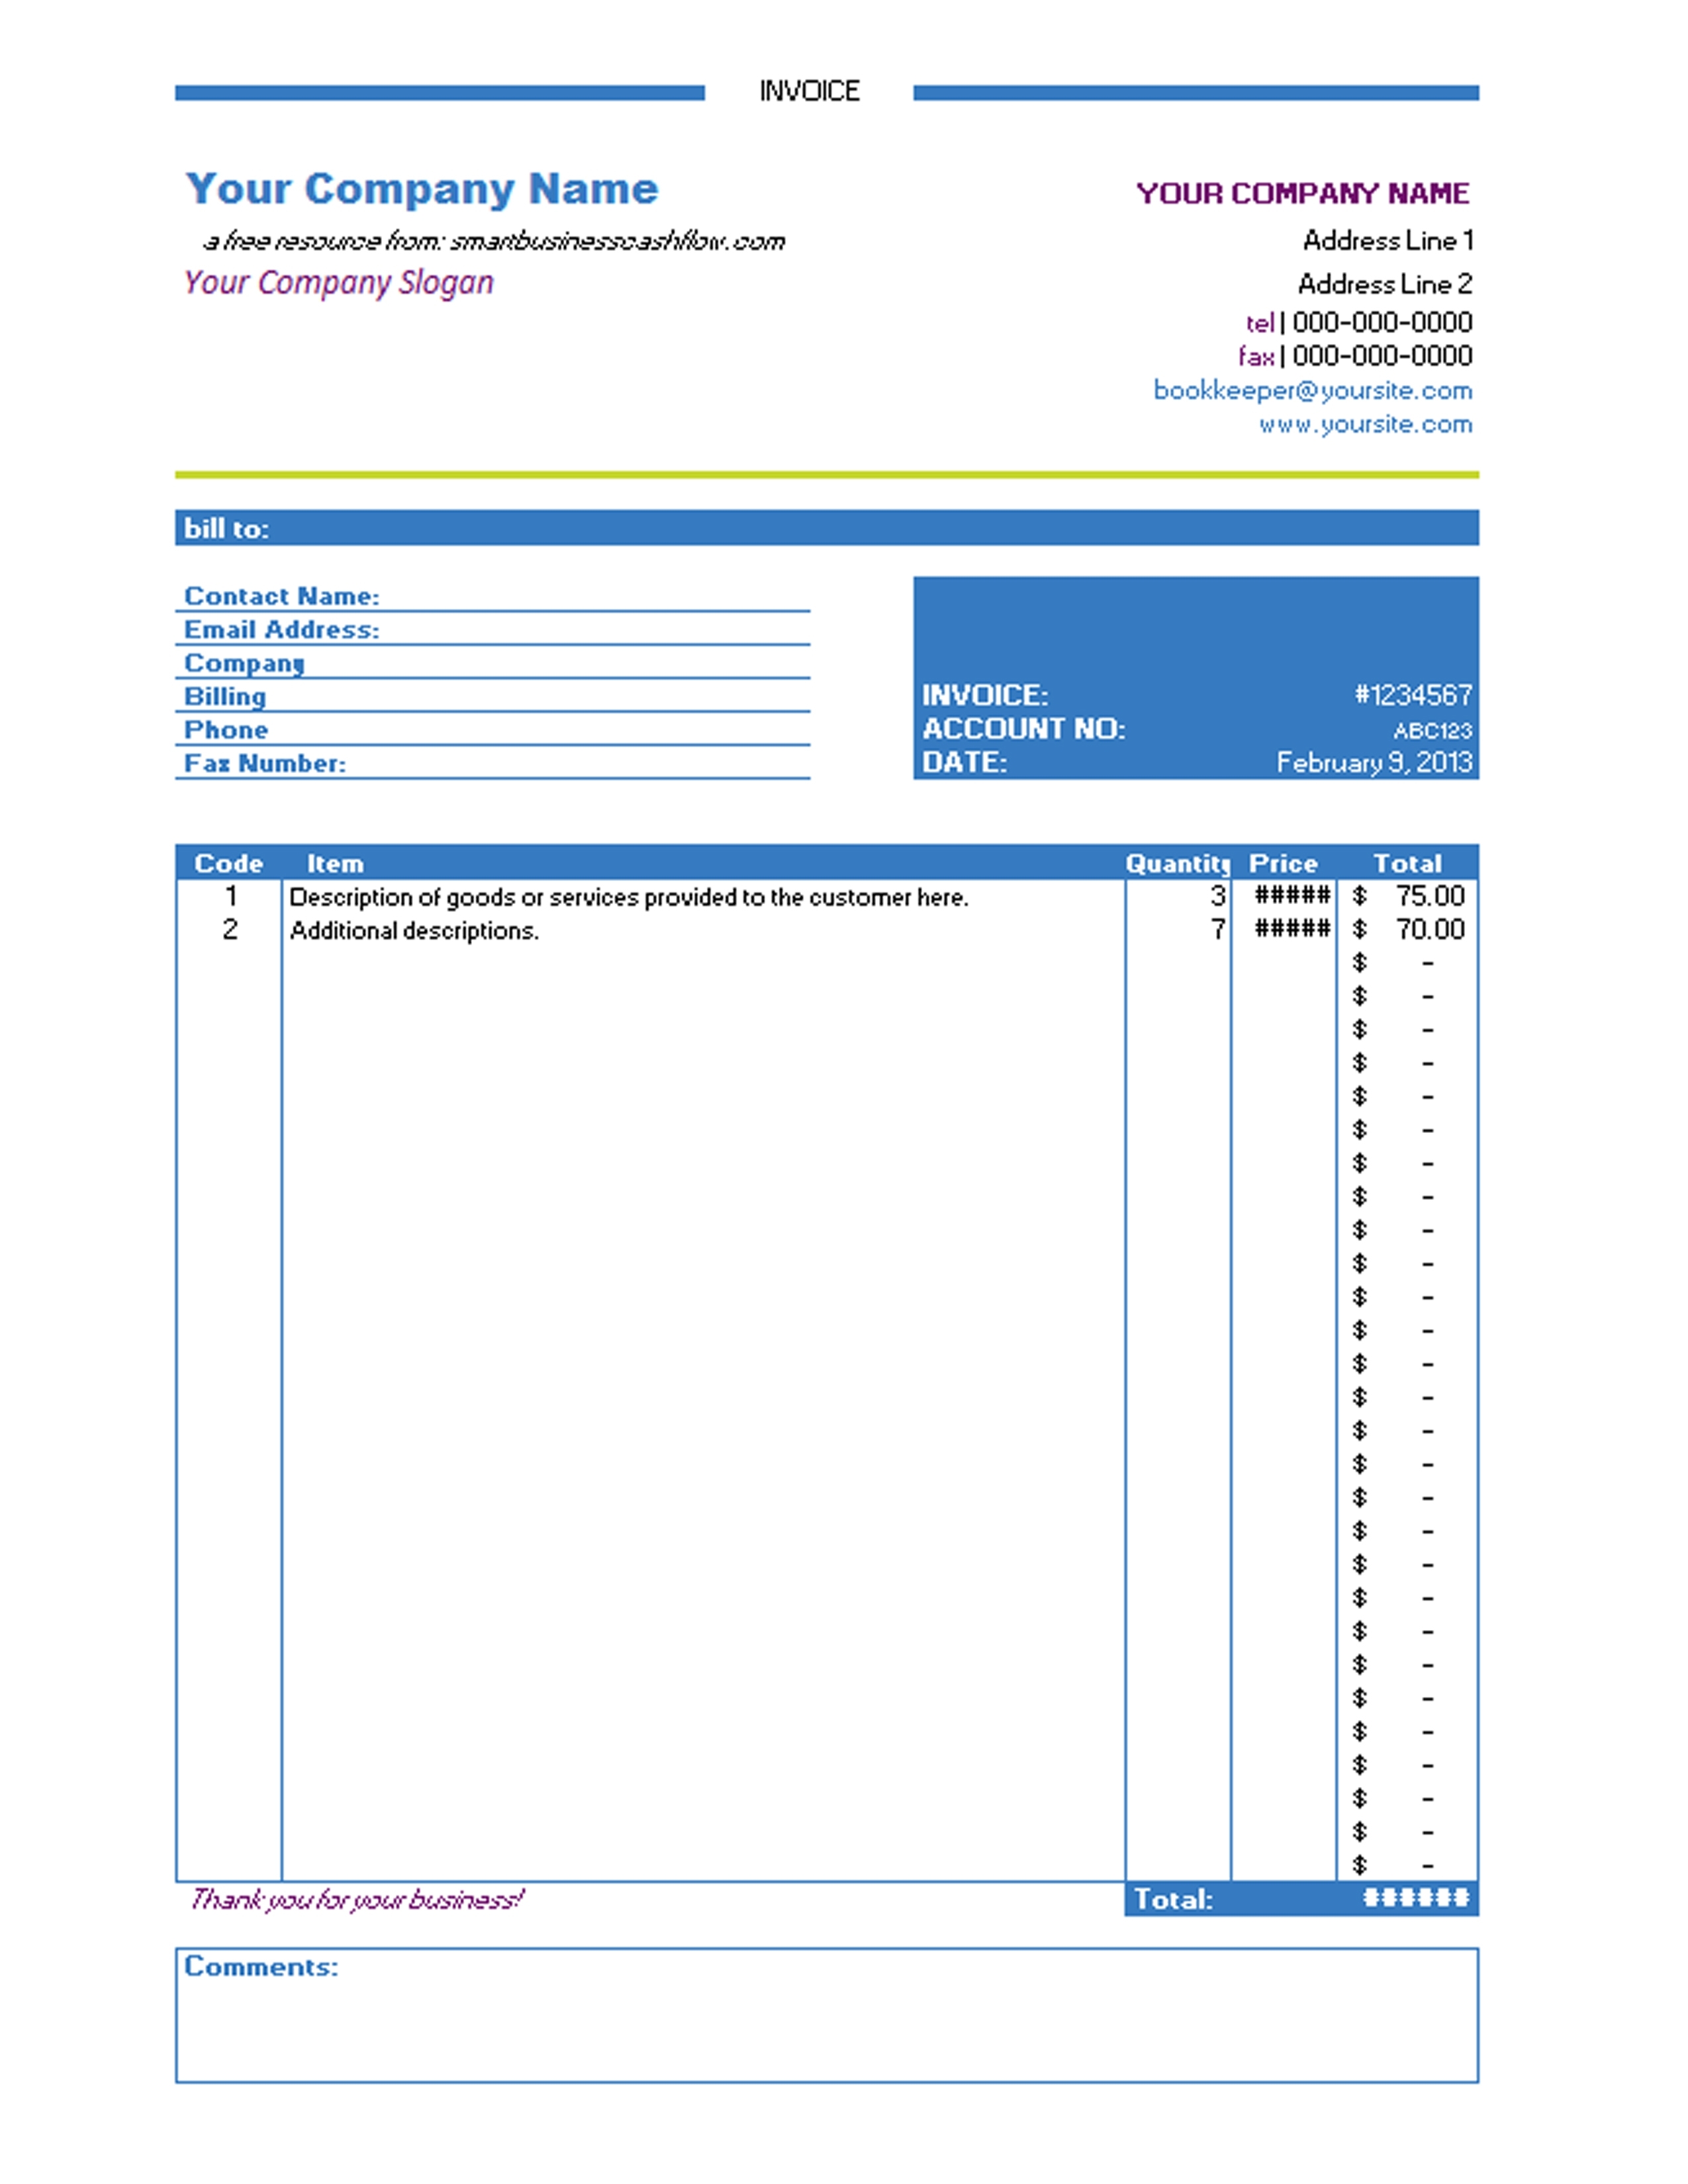 weekly-invoice-template-invoice-template-ideas